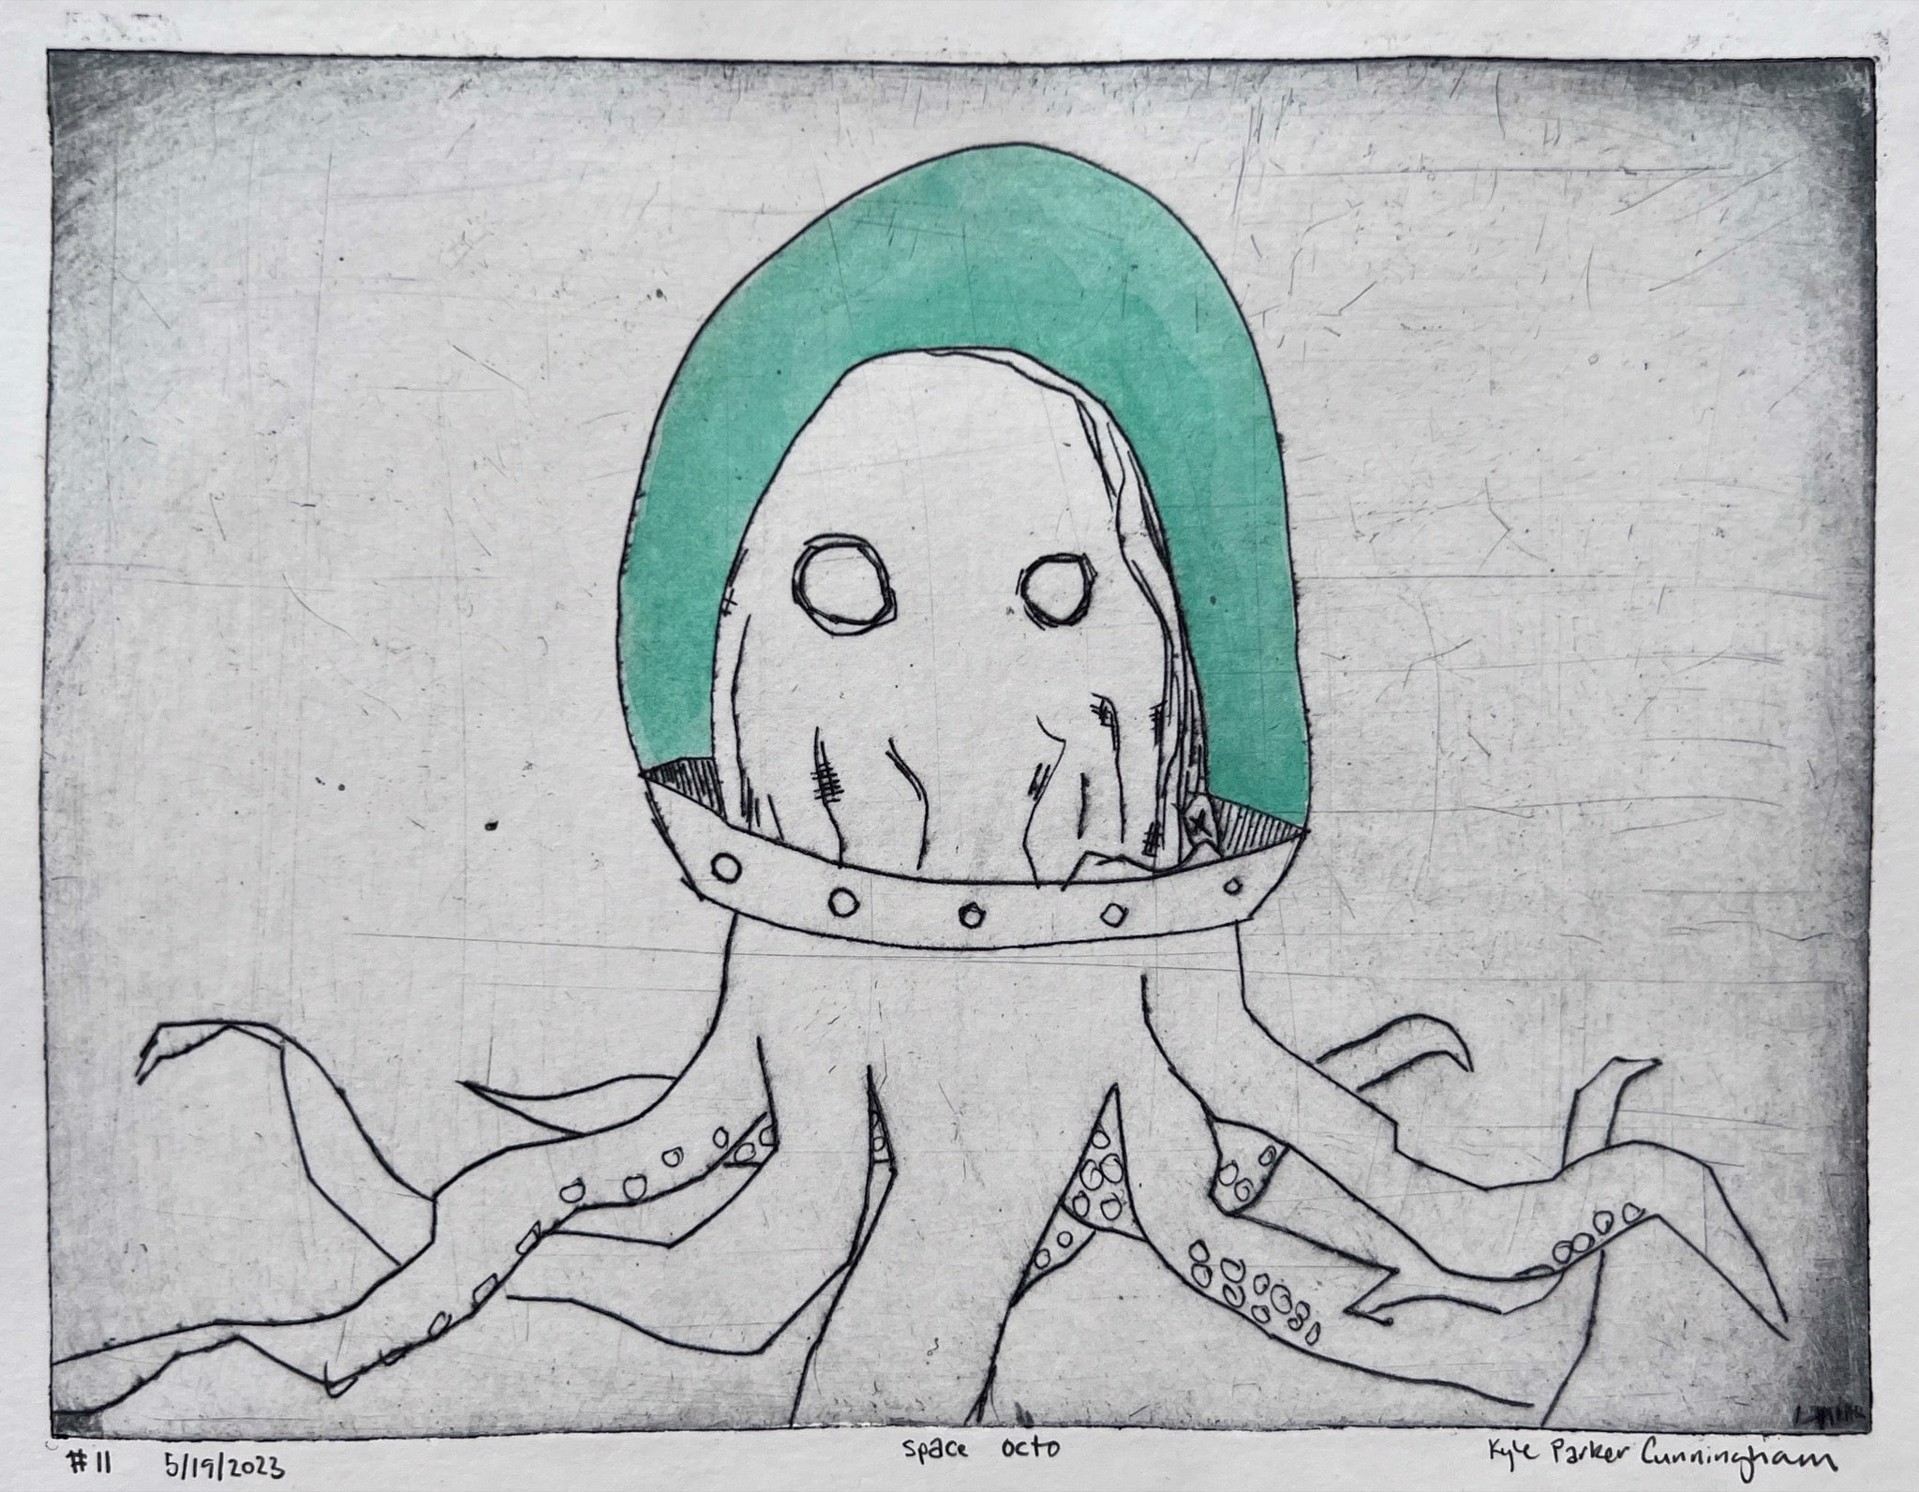 Space Octo No. 11 by Kyle Parker Cunningham